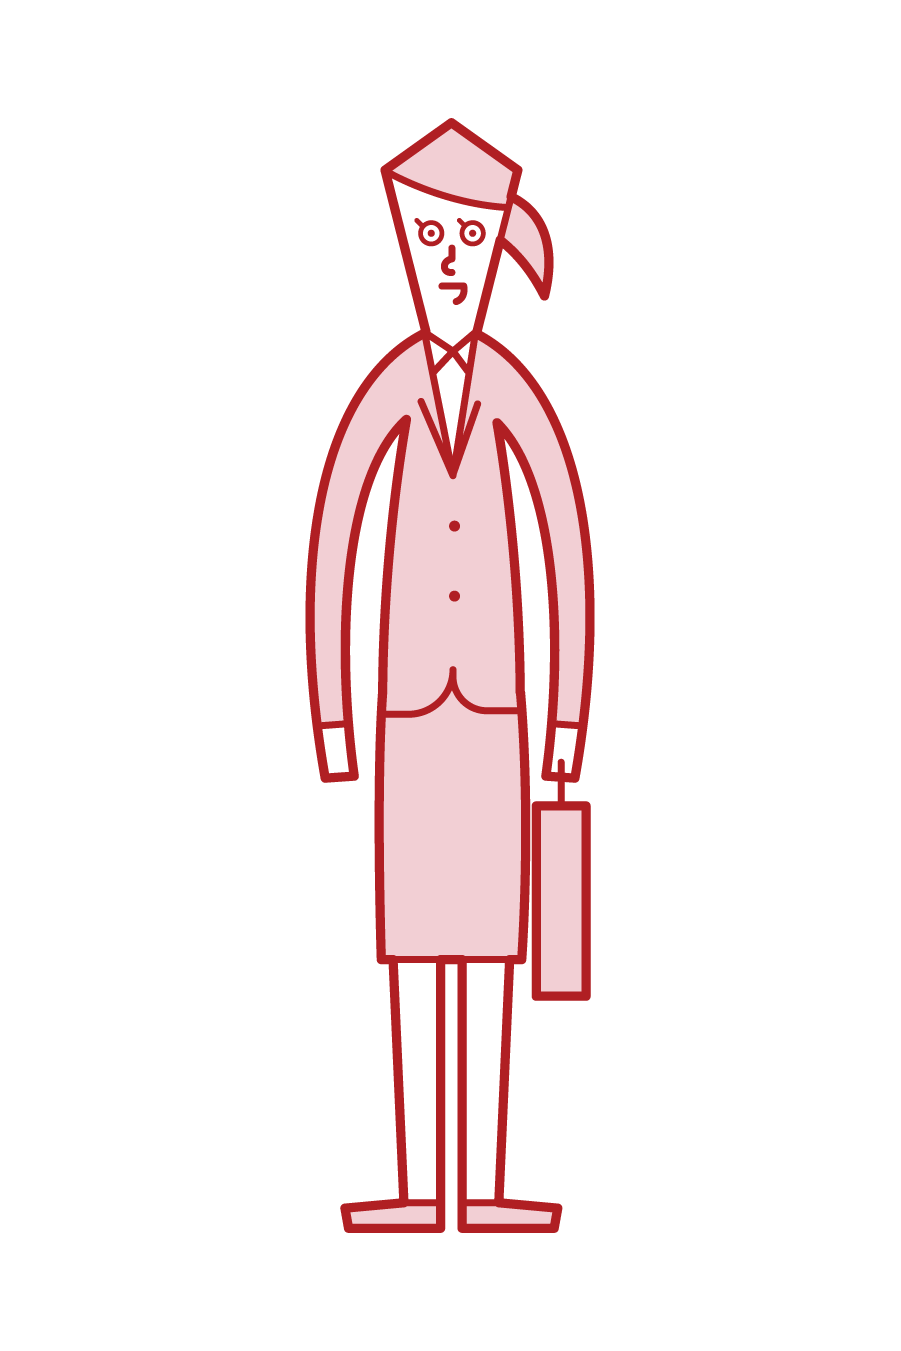 Illustrations of woman employees and office workers